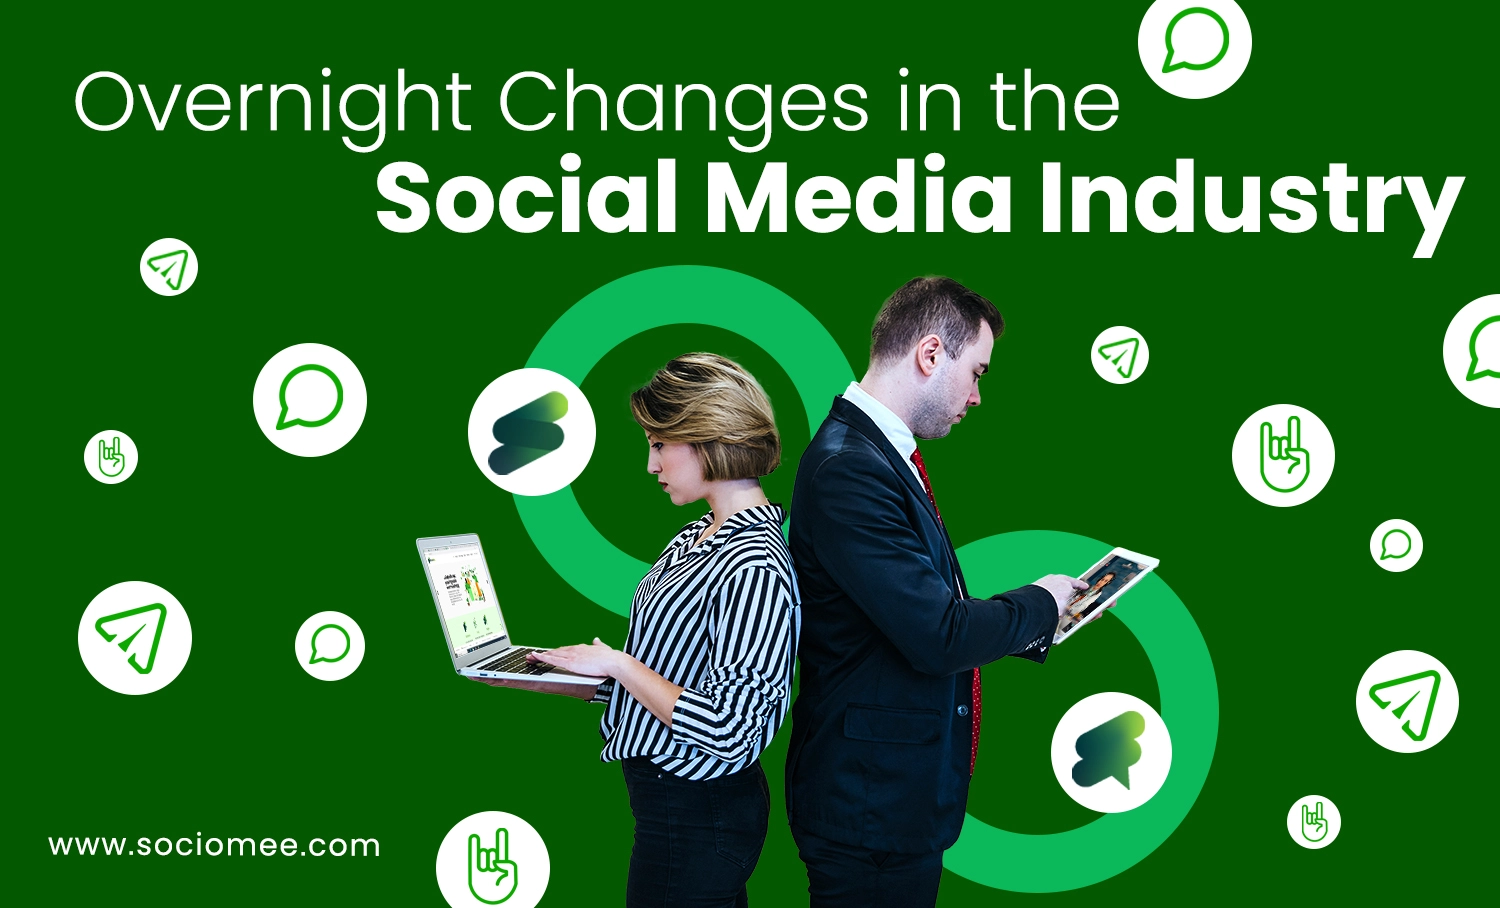 Overnight changes in the social media industry